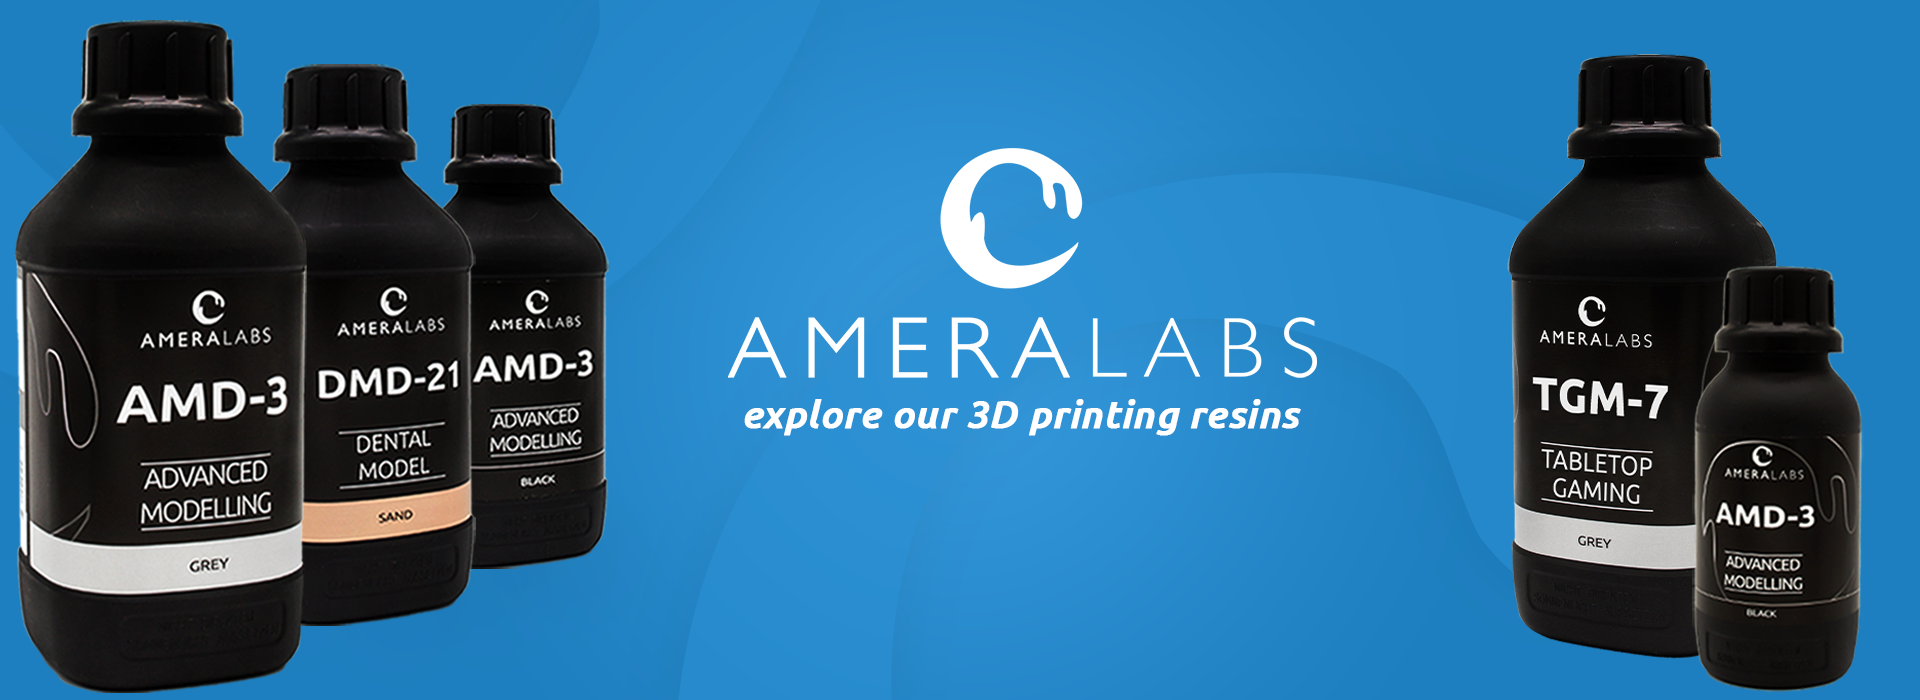 Invitation to explore AmeraLabs 3D printing resin shop